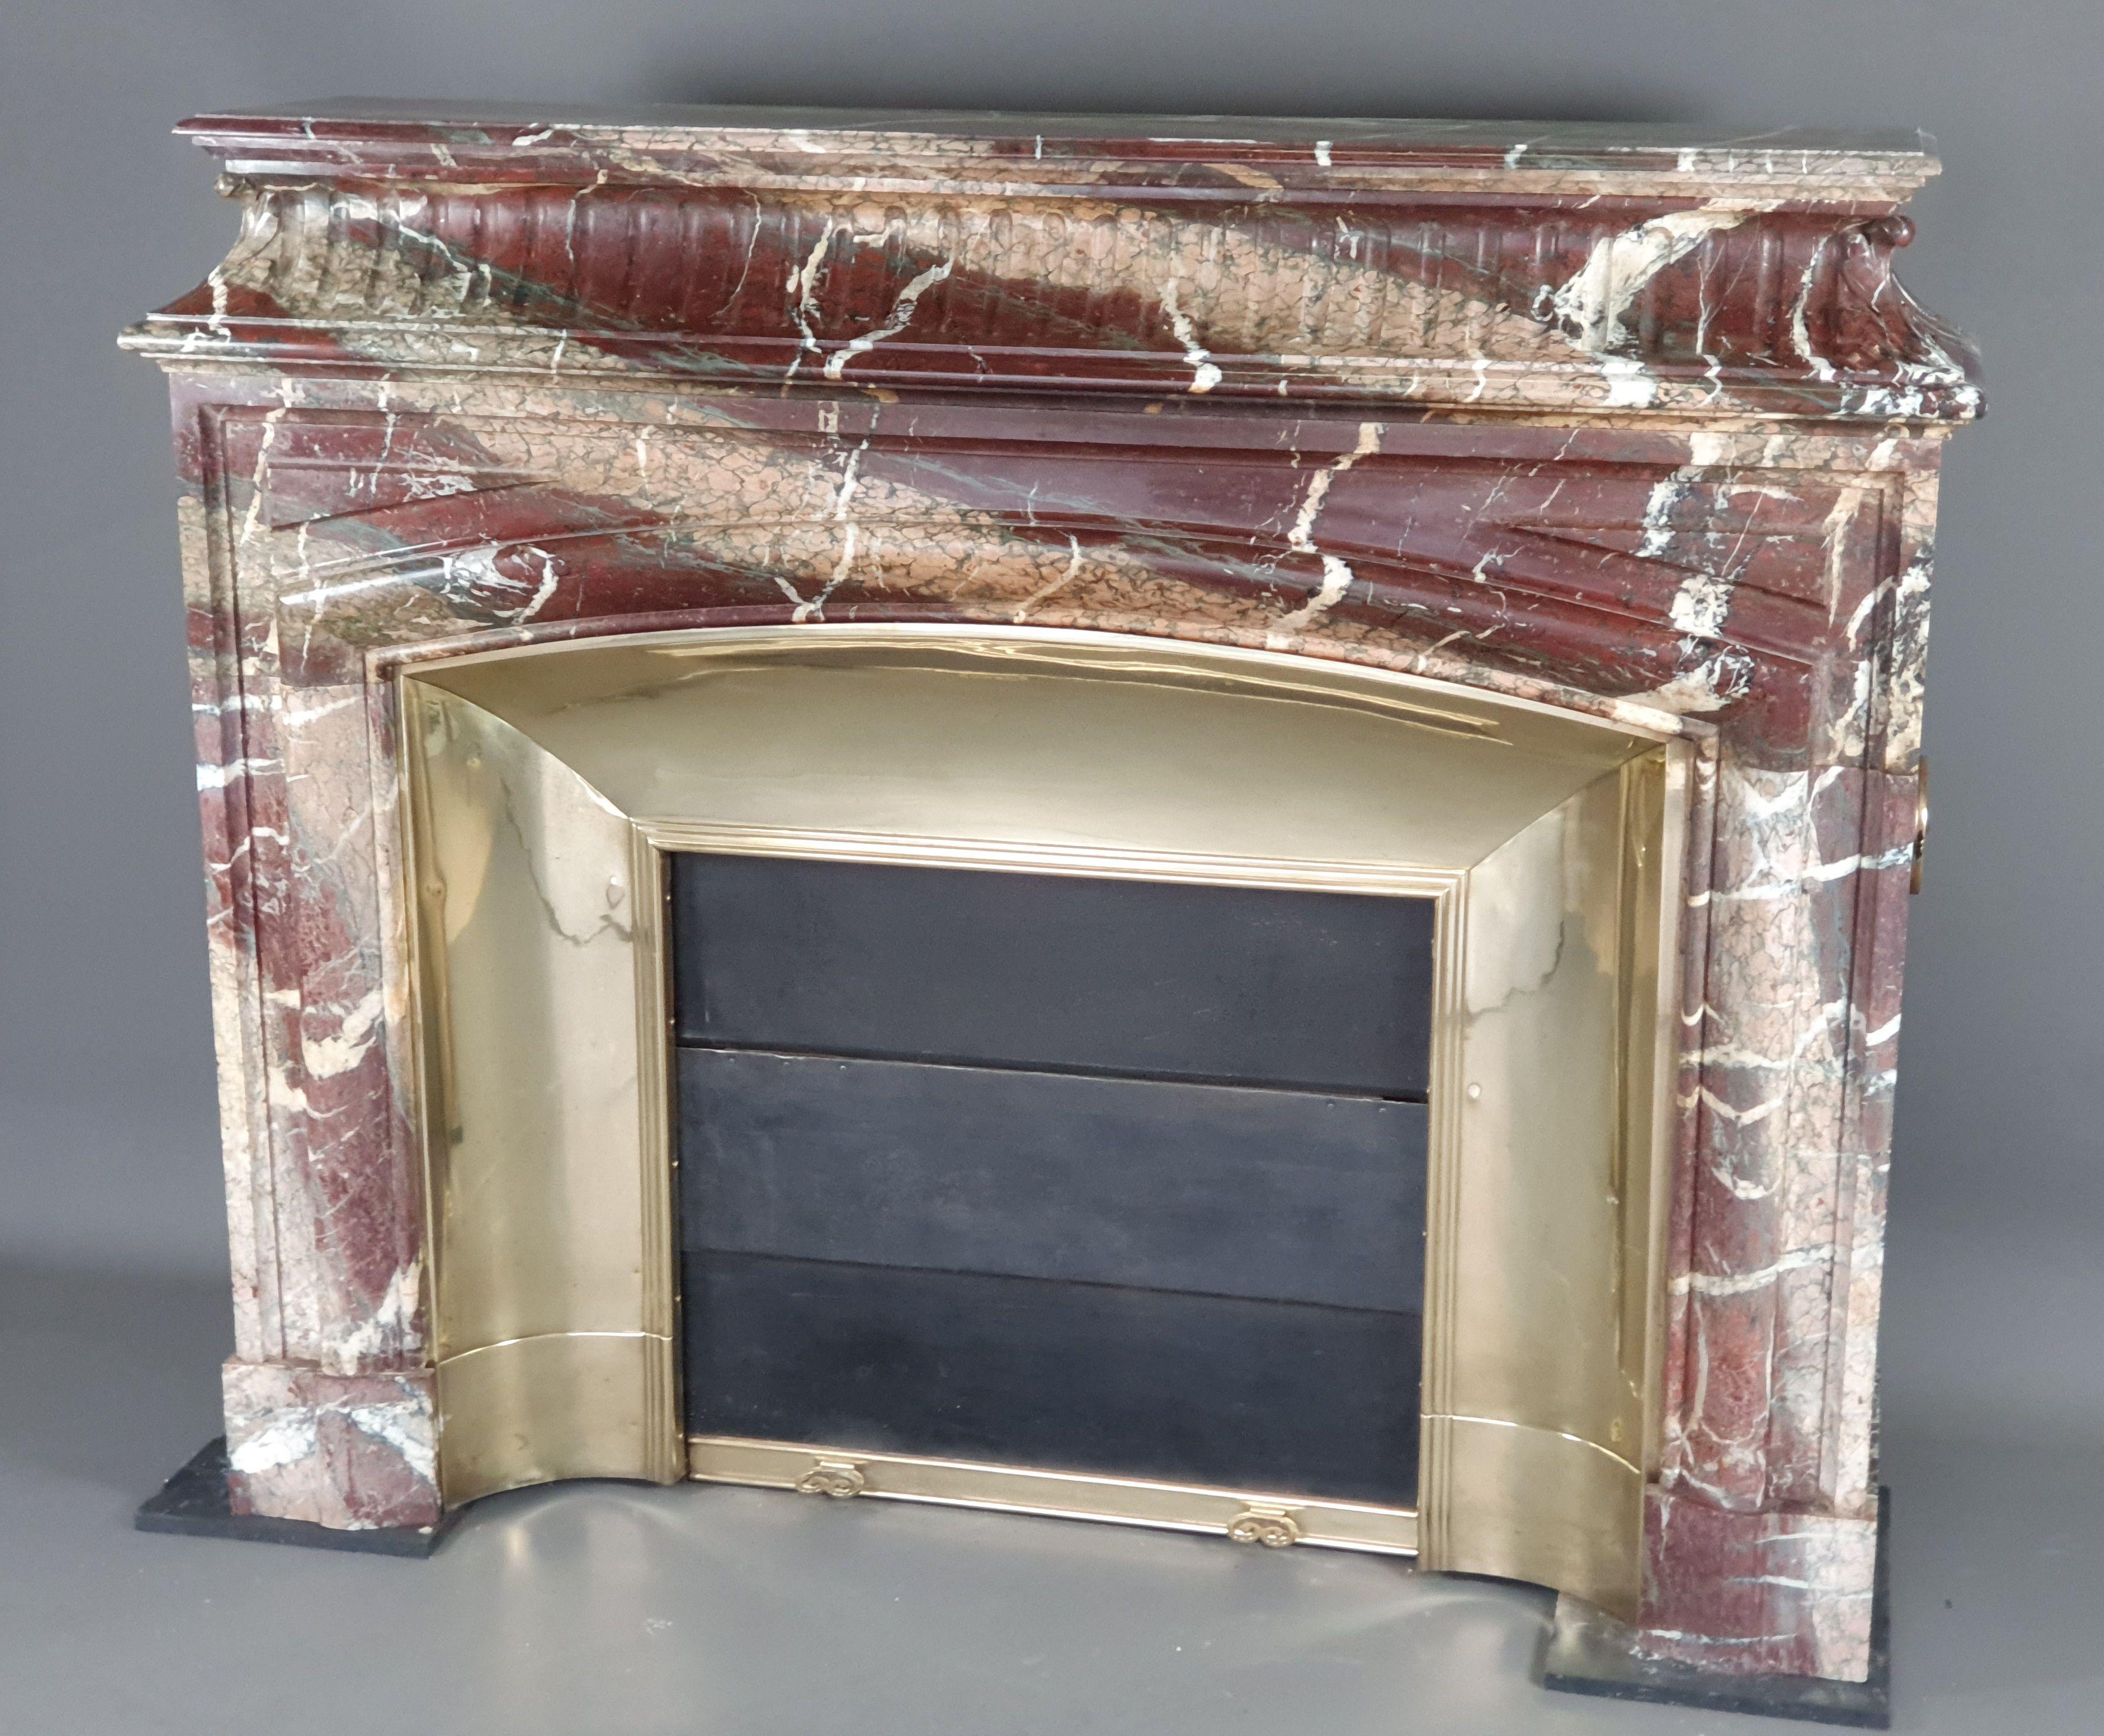 Important Louis XIV style fireplace with acroterion and boudin.

Acroterion decorated with large grooves and plant-inspired decorations on the spandrels. Presented with its polished brass shrunken and retractable trifold door (complete with its